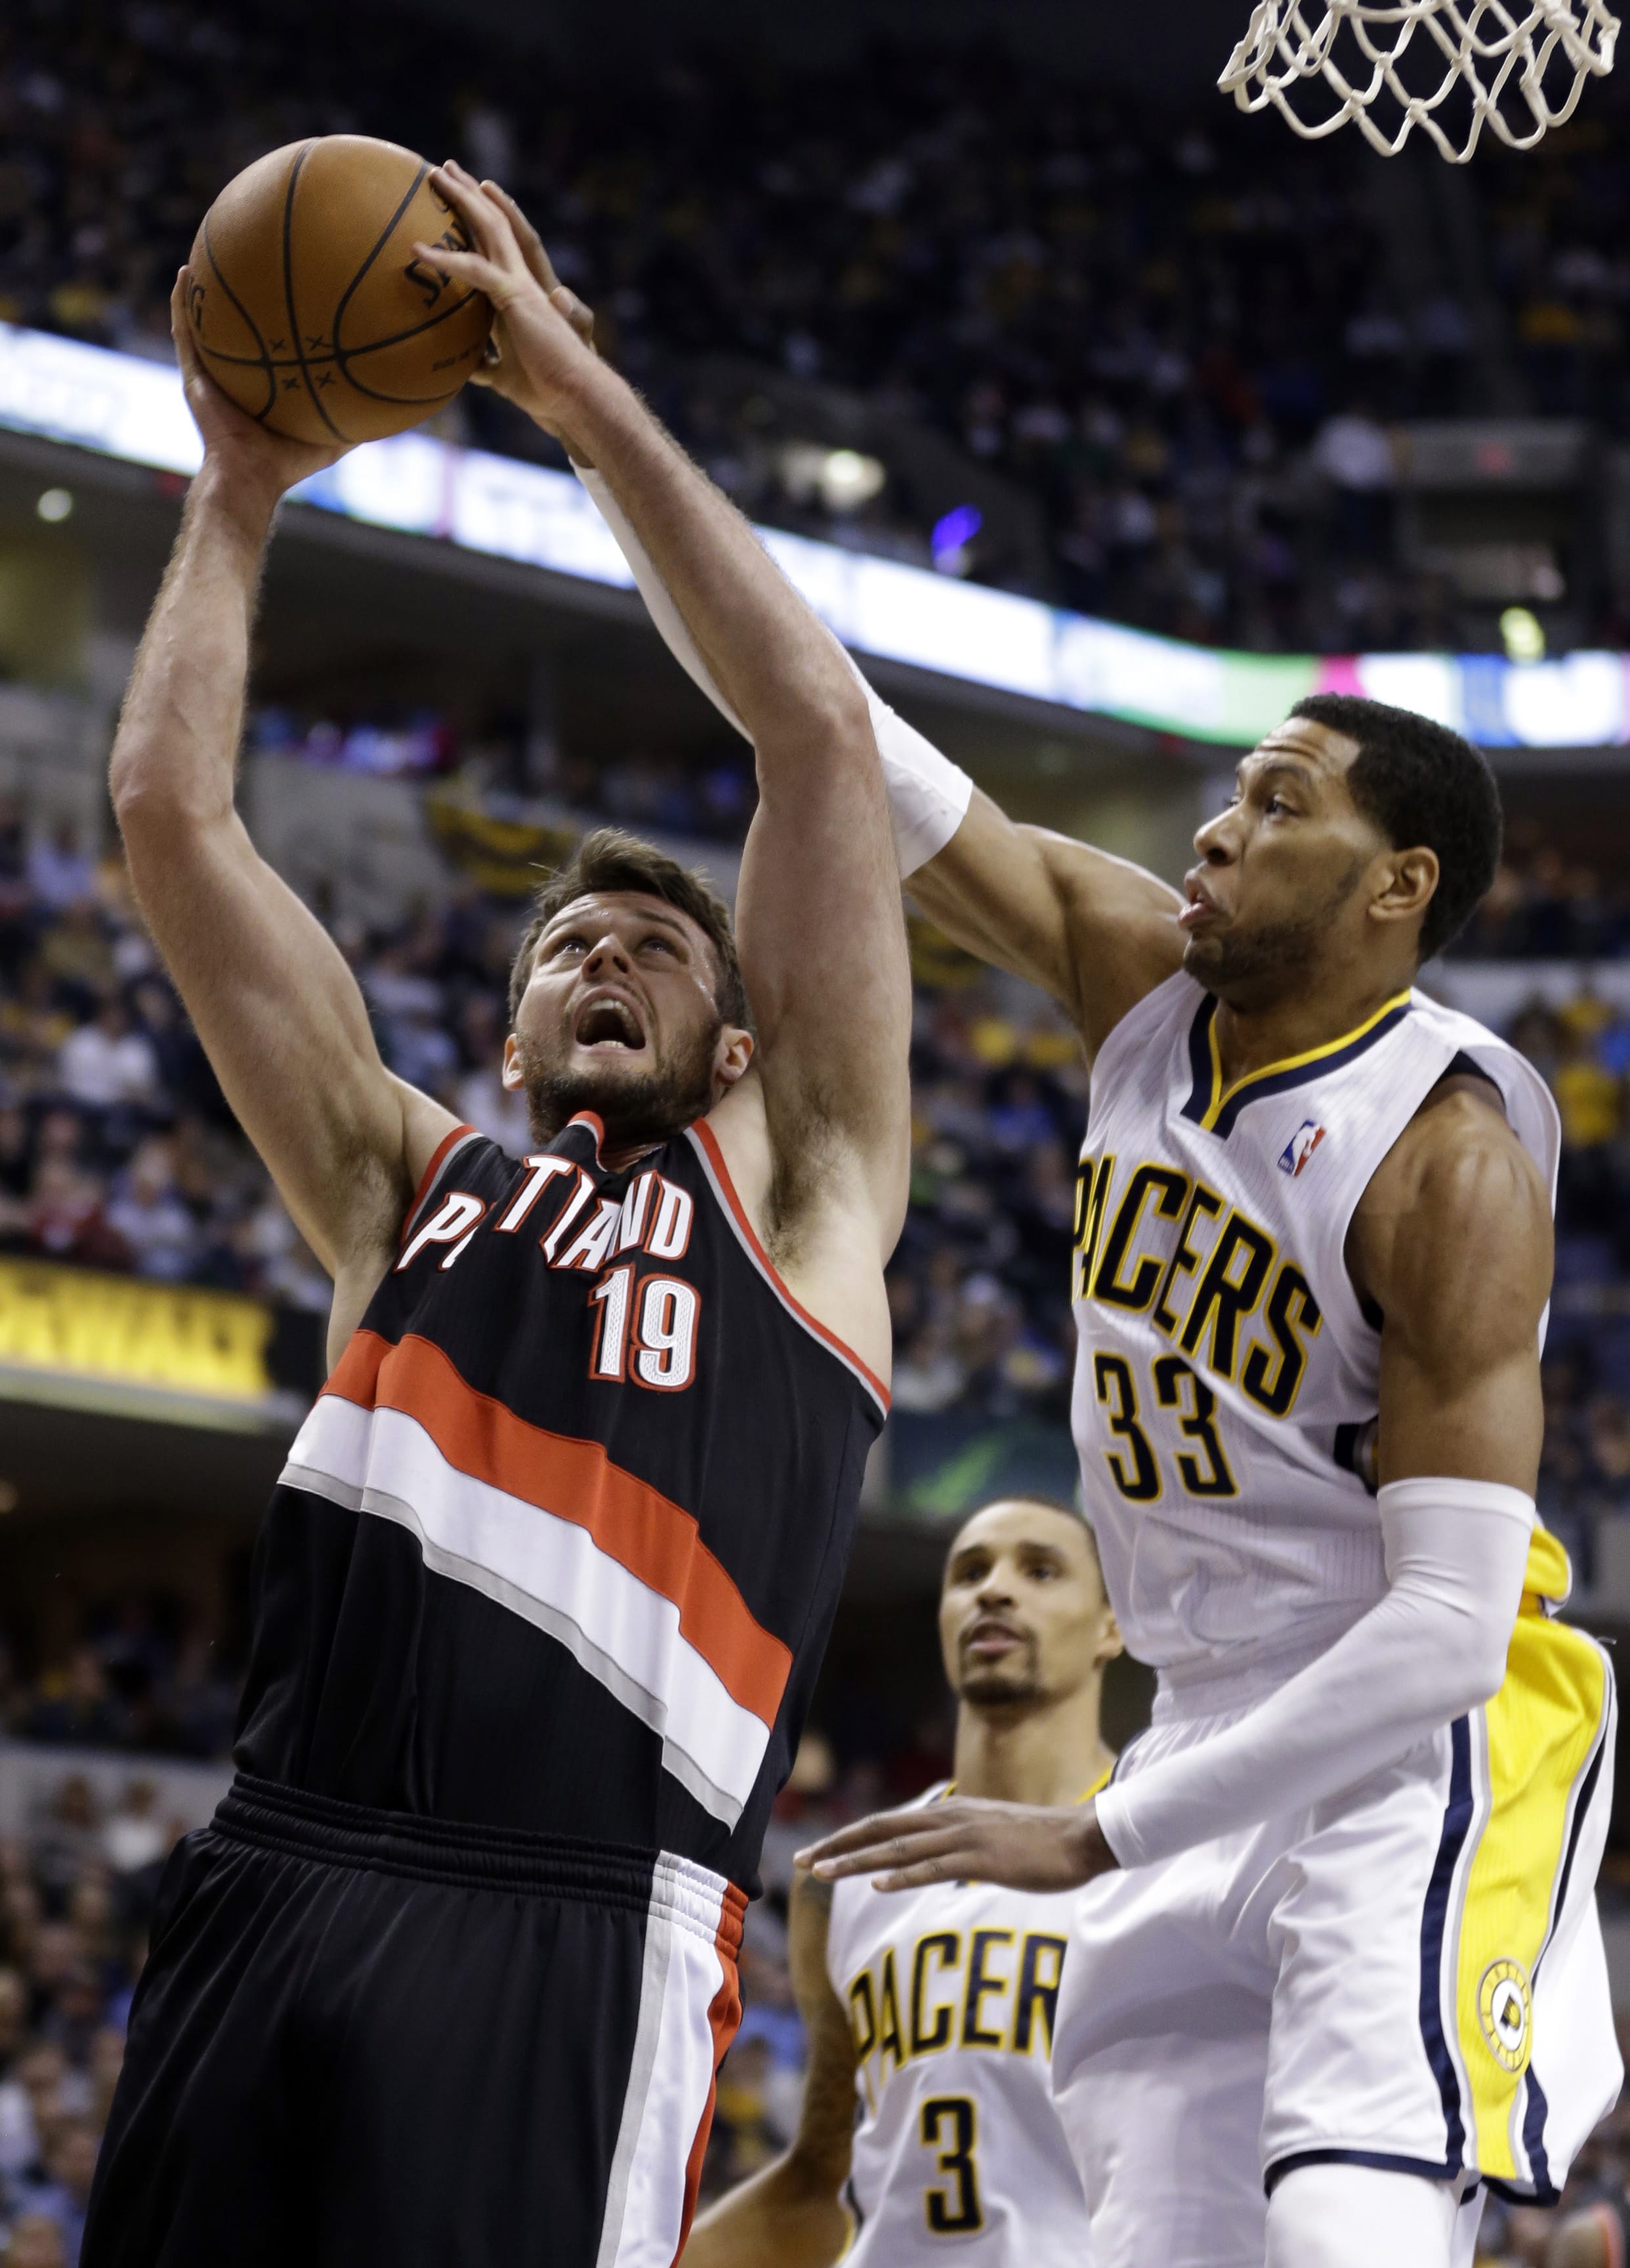 The Blazers expect to have Joel Freeland (19) back healthy for the playoffs.